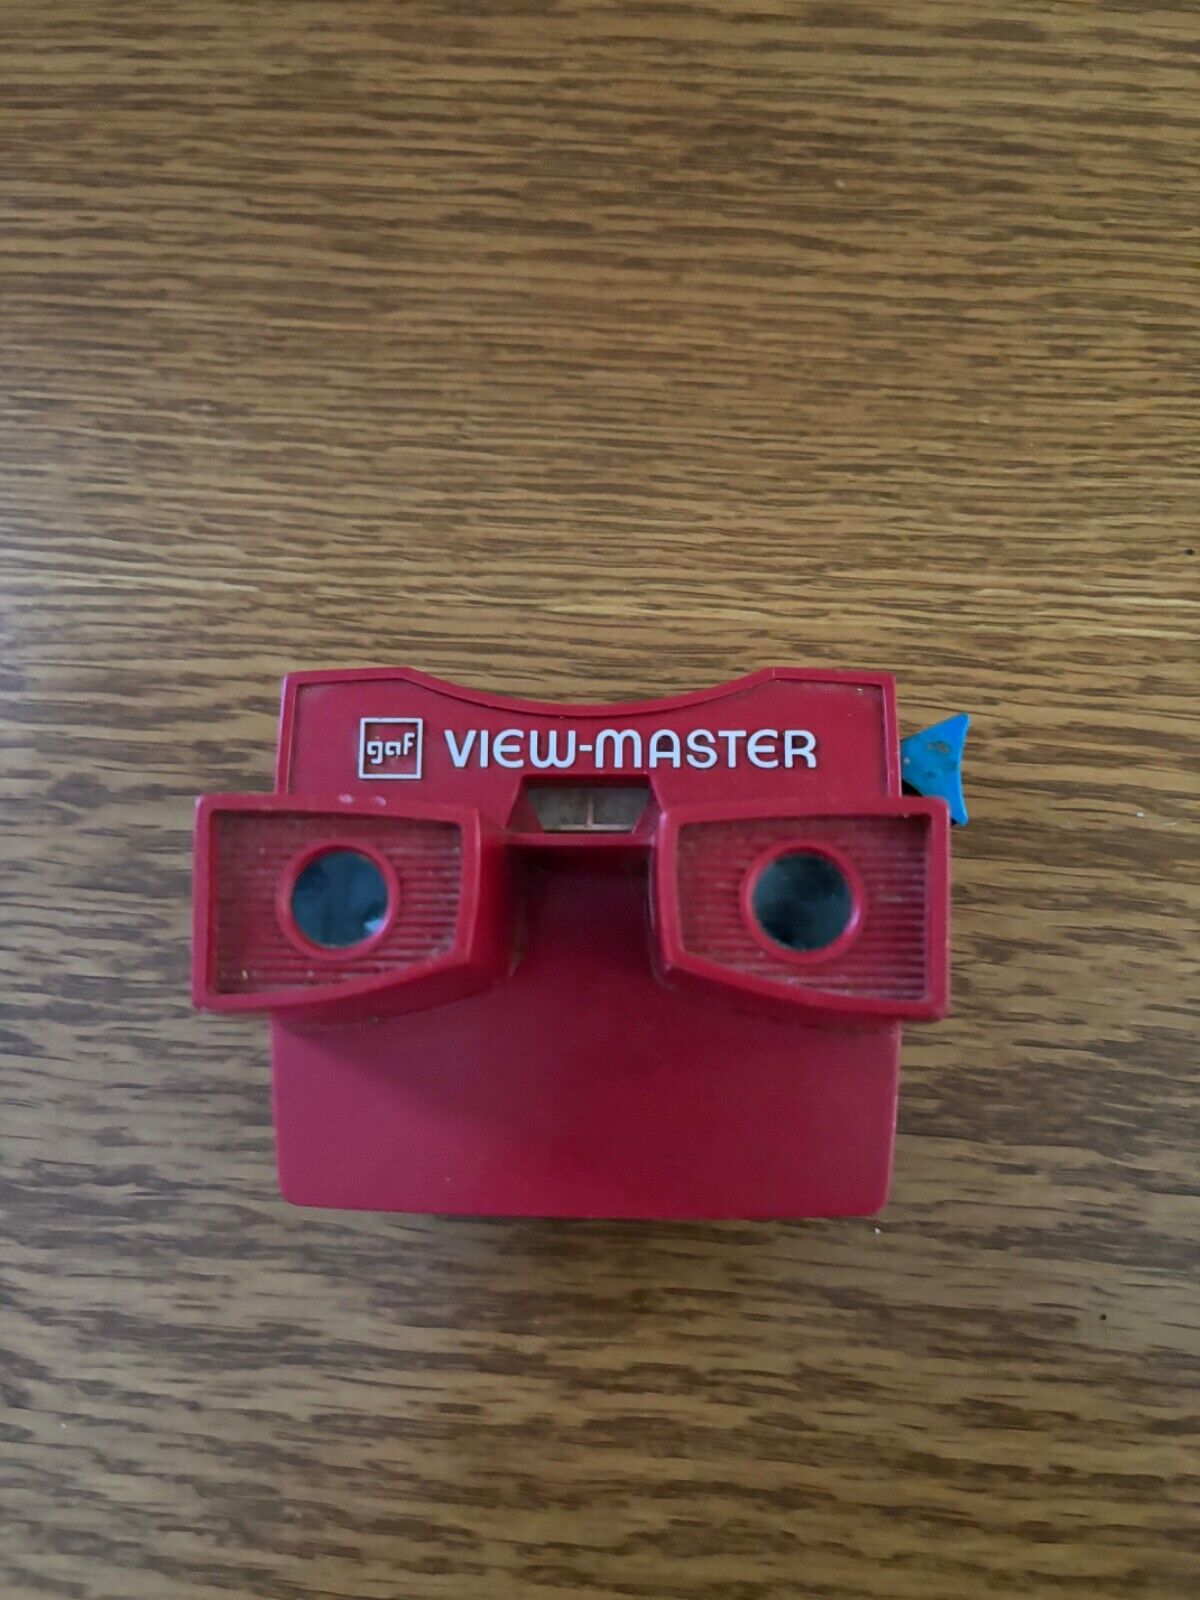 Vintage gaf View Master red and white